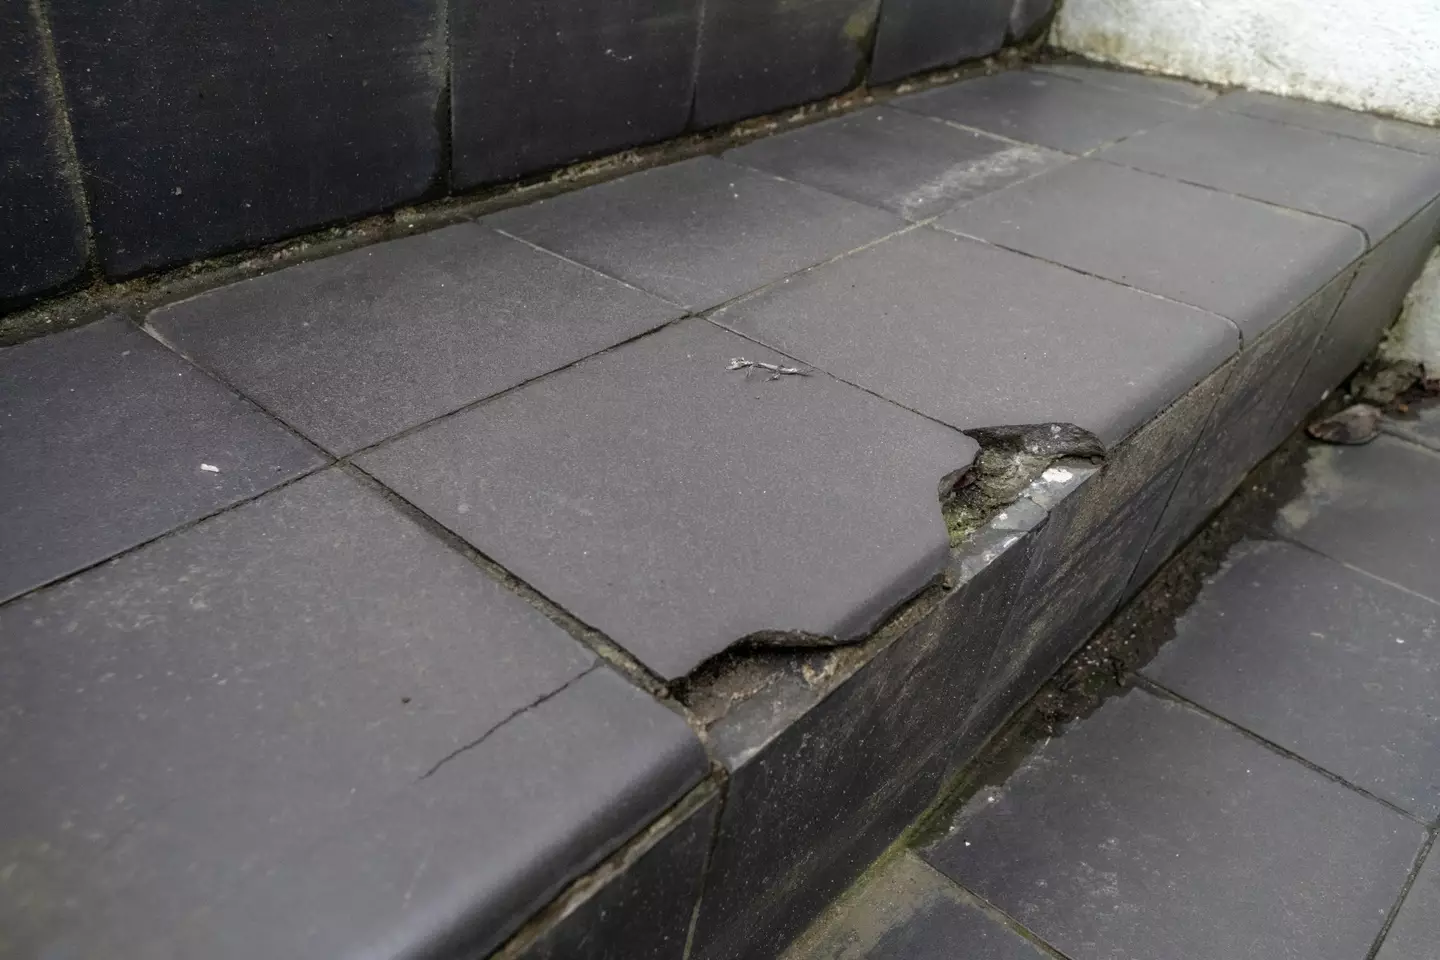 Mr Lee says the popularity of the spot is costing him in repair bills, including thousands spent to replace cracked tiles.